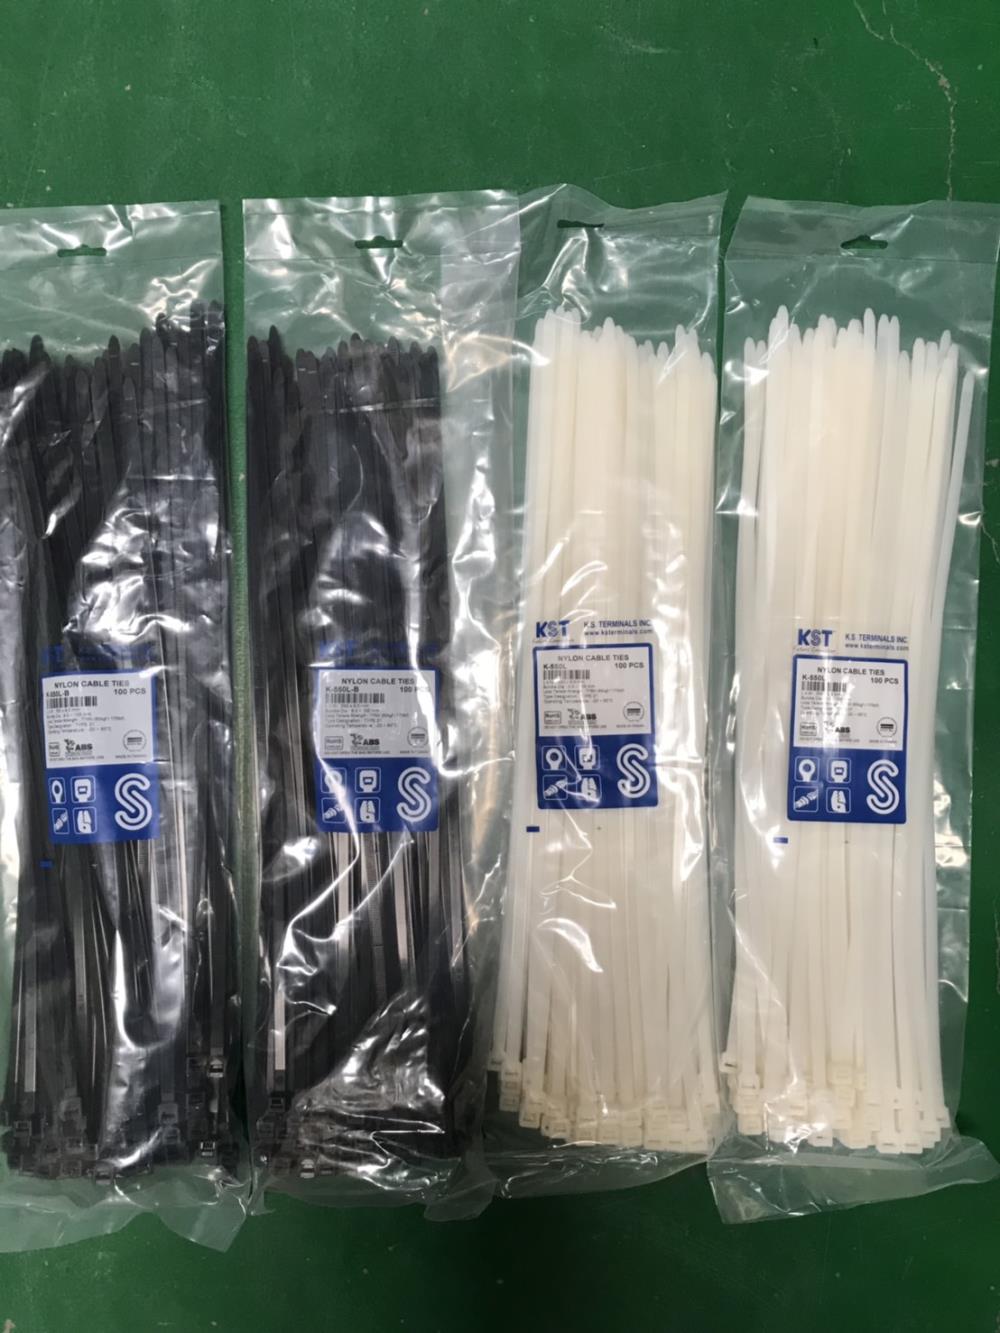 K-550L-B Cable ties 22" สีดำ,CABLE TIES ,KST,Materials Handling/Cable Ties